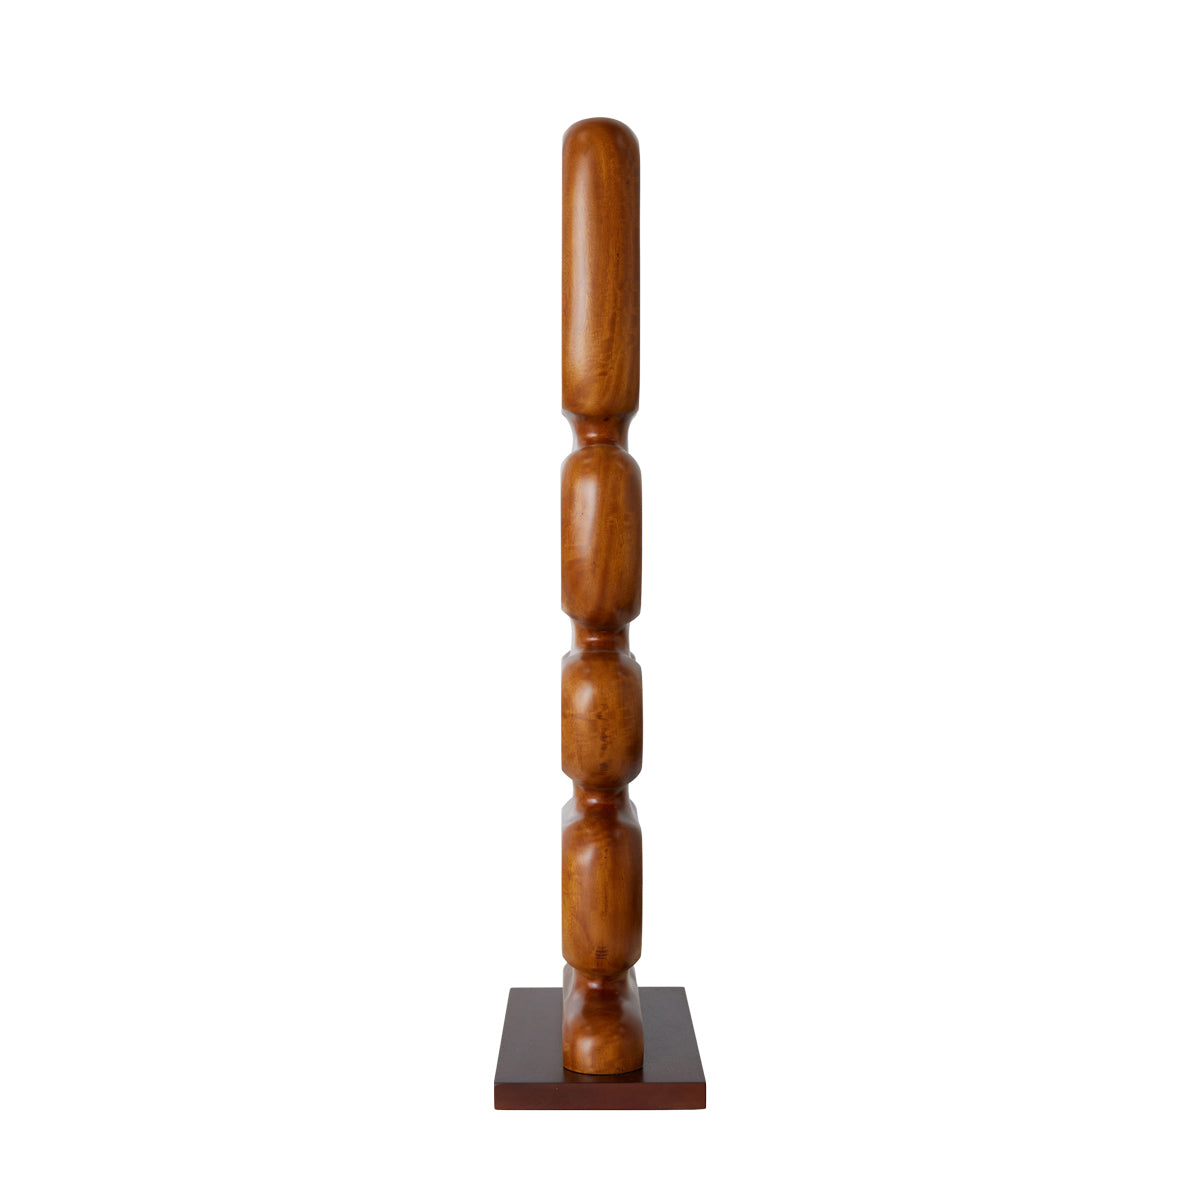 Hk Objects: Hand Carved Wooden Sculpture